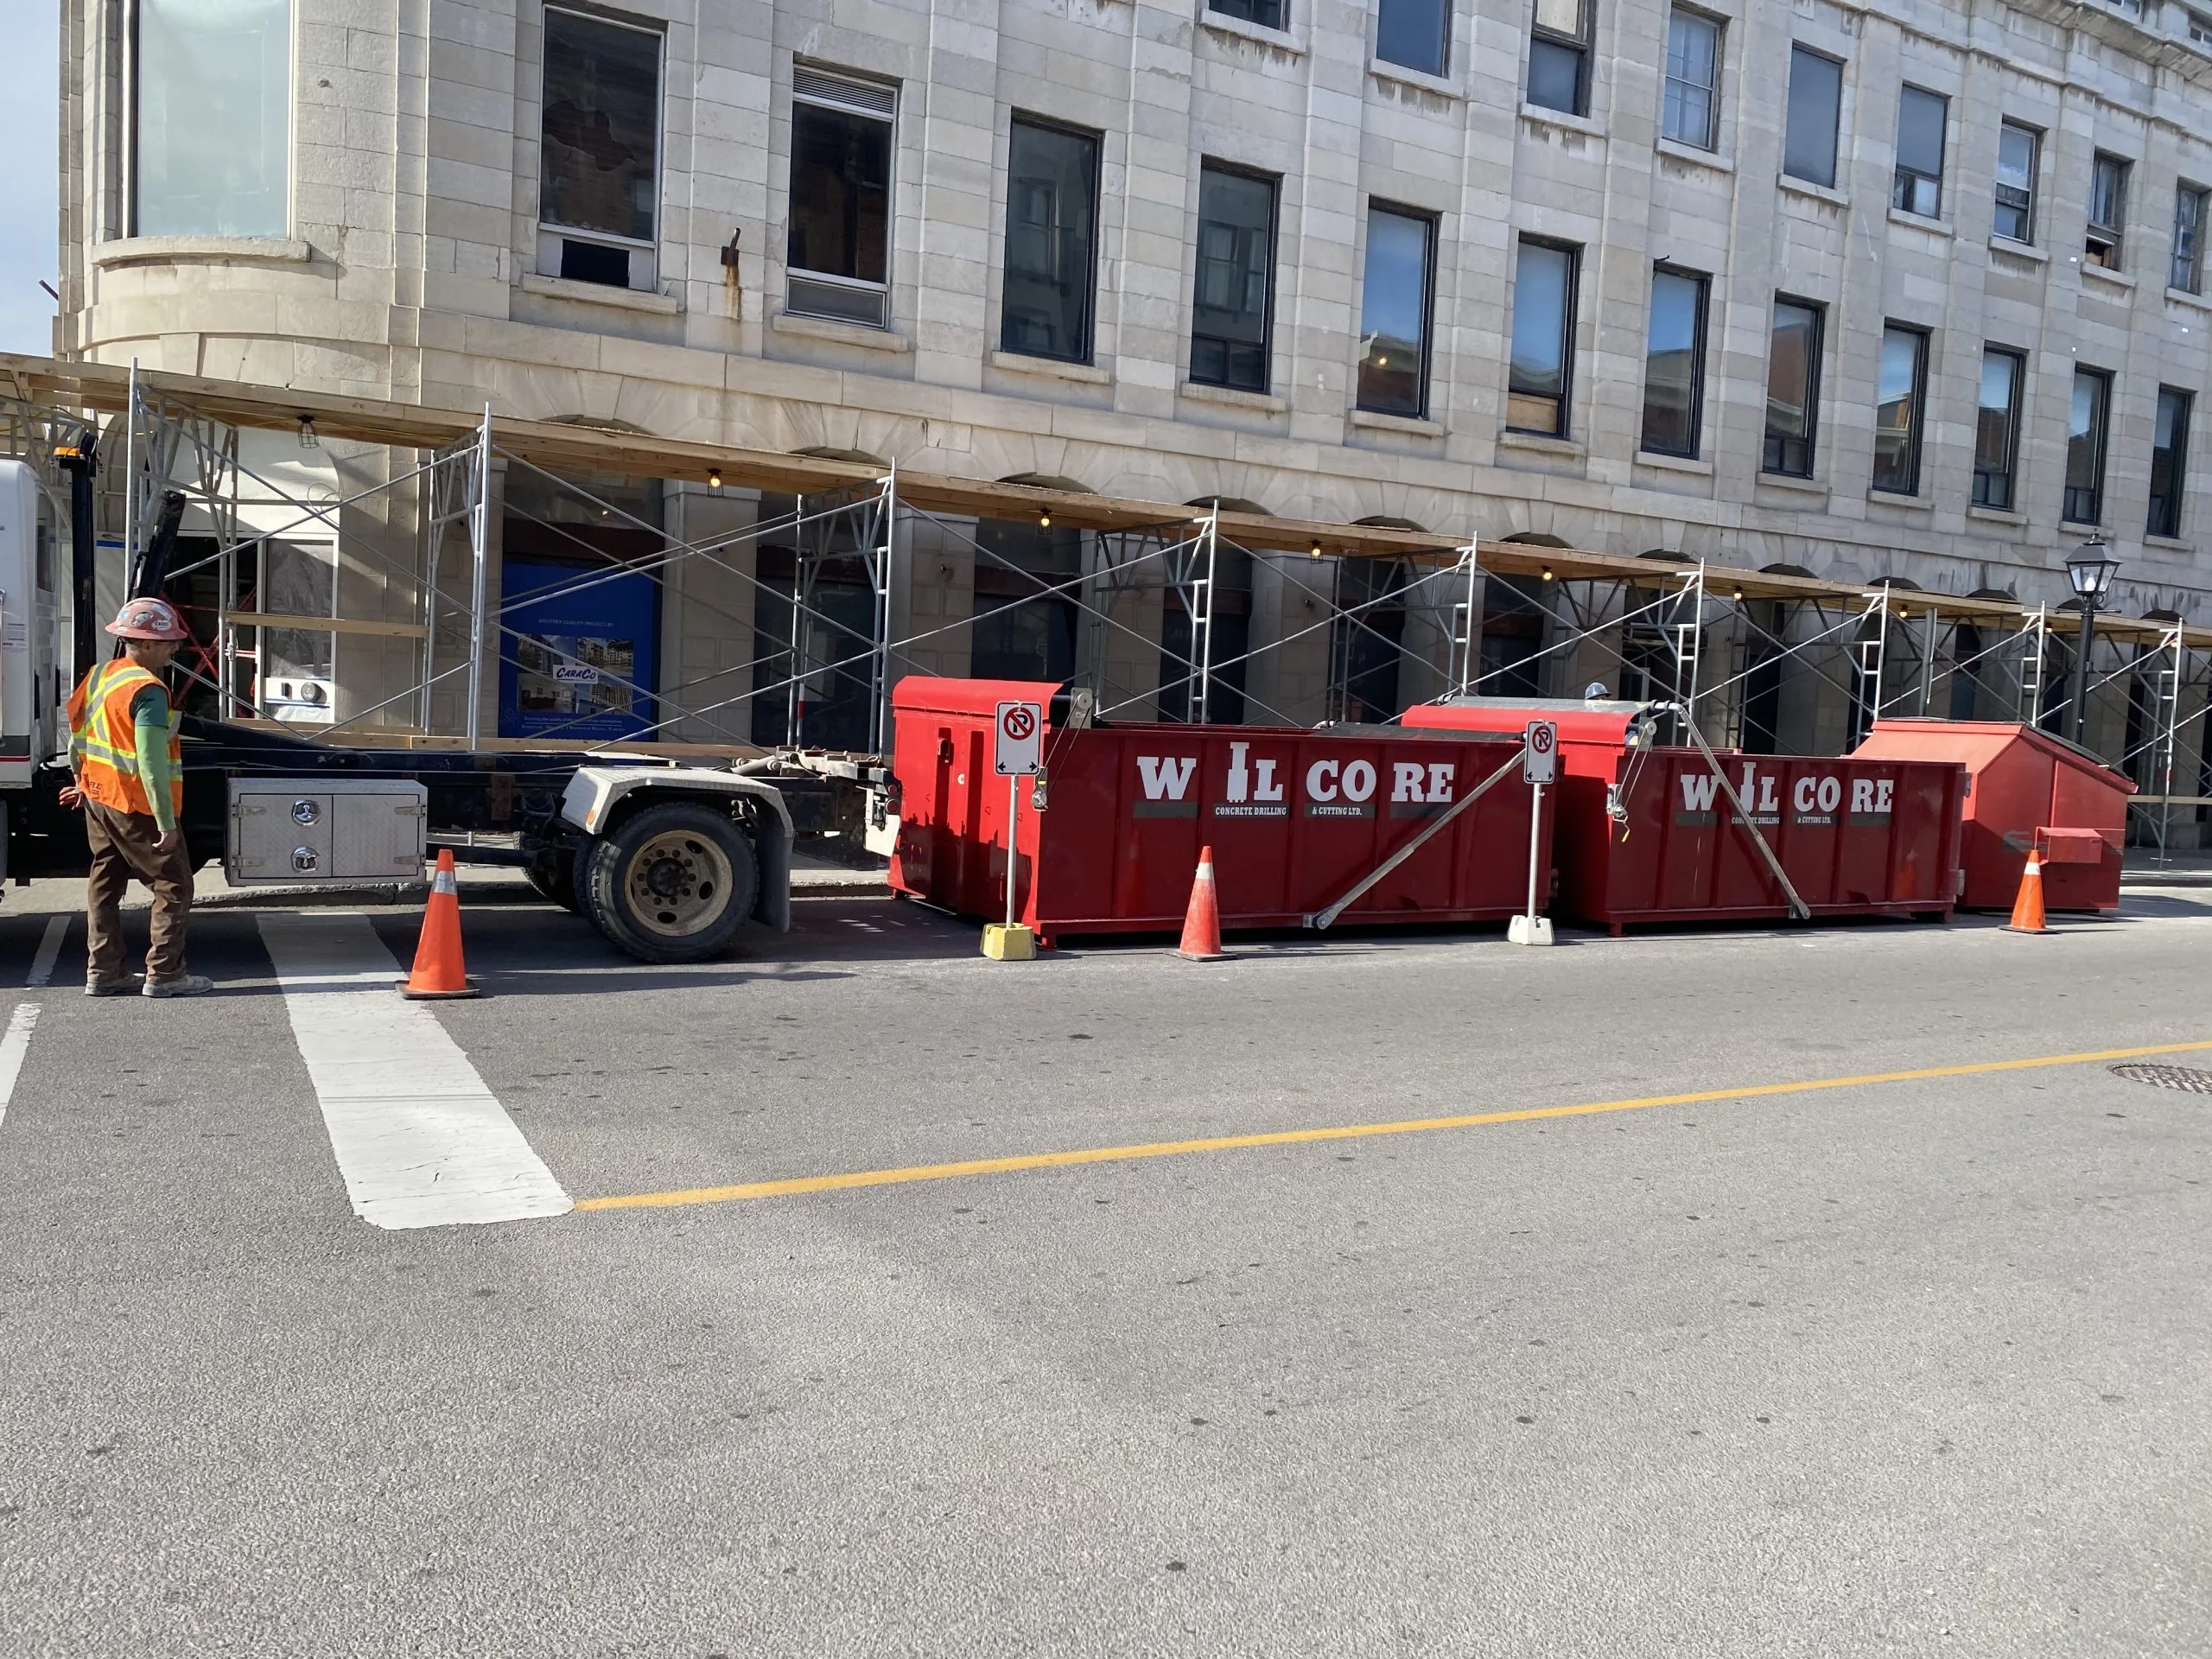 Photo of a Wilcore truck and two Wilcore dumpsters